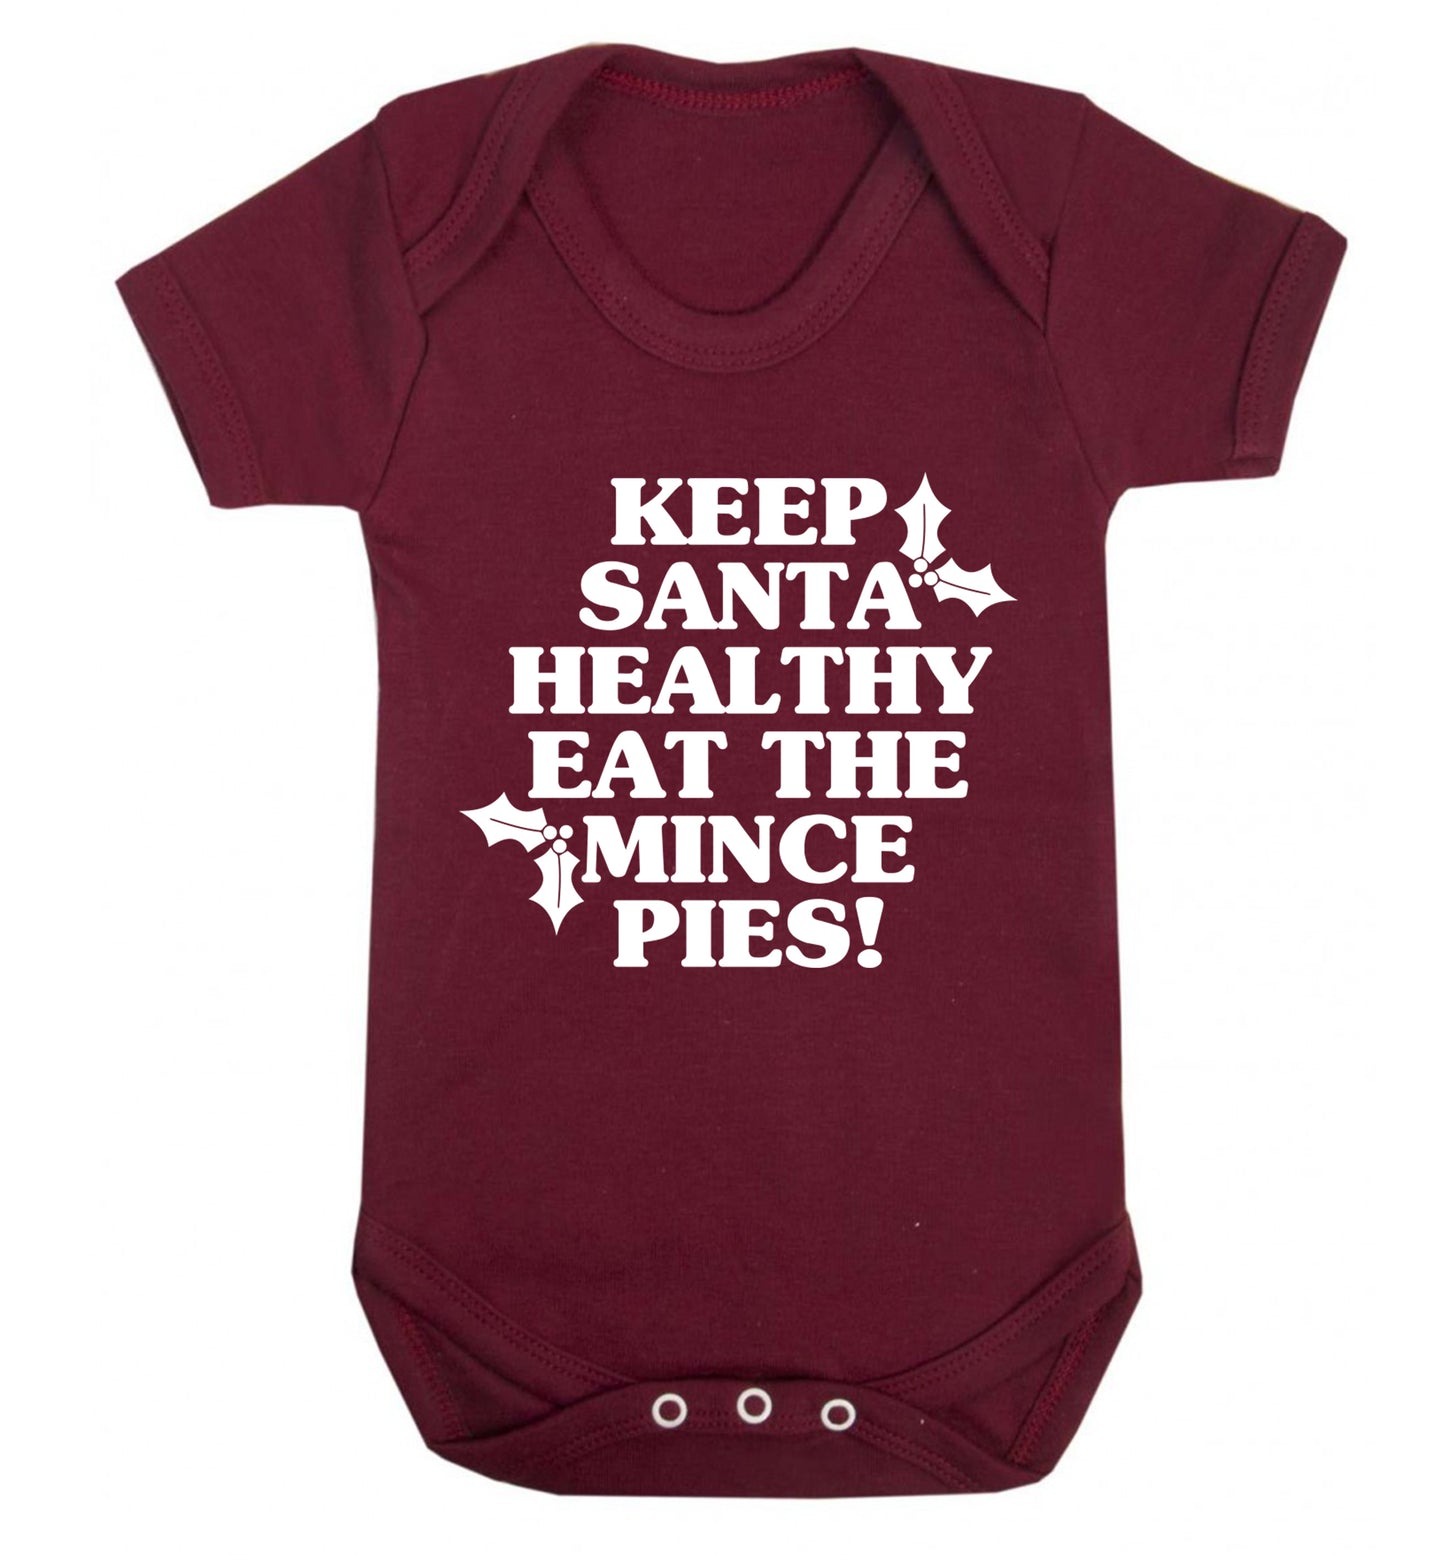 Keep santa healthy eat the mince pies Baby Vest maroon 18-24 months